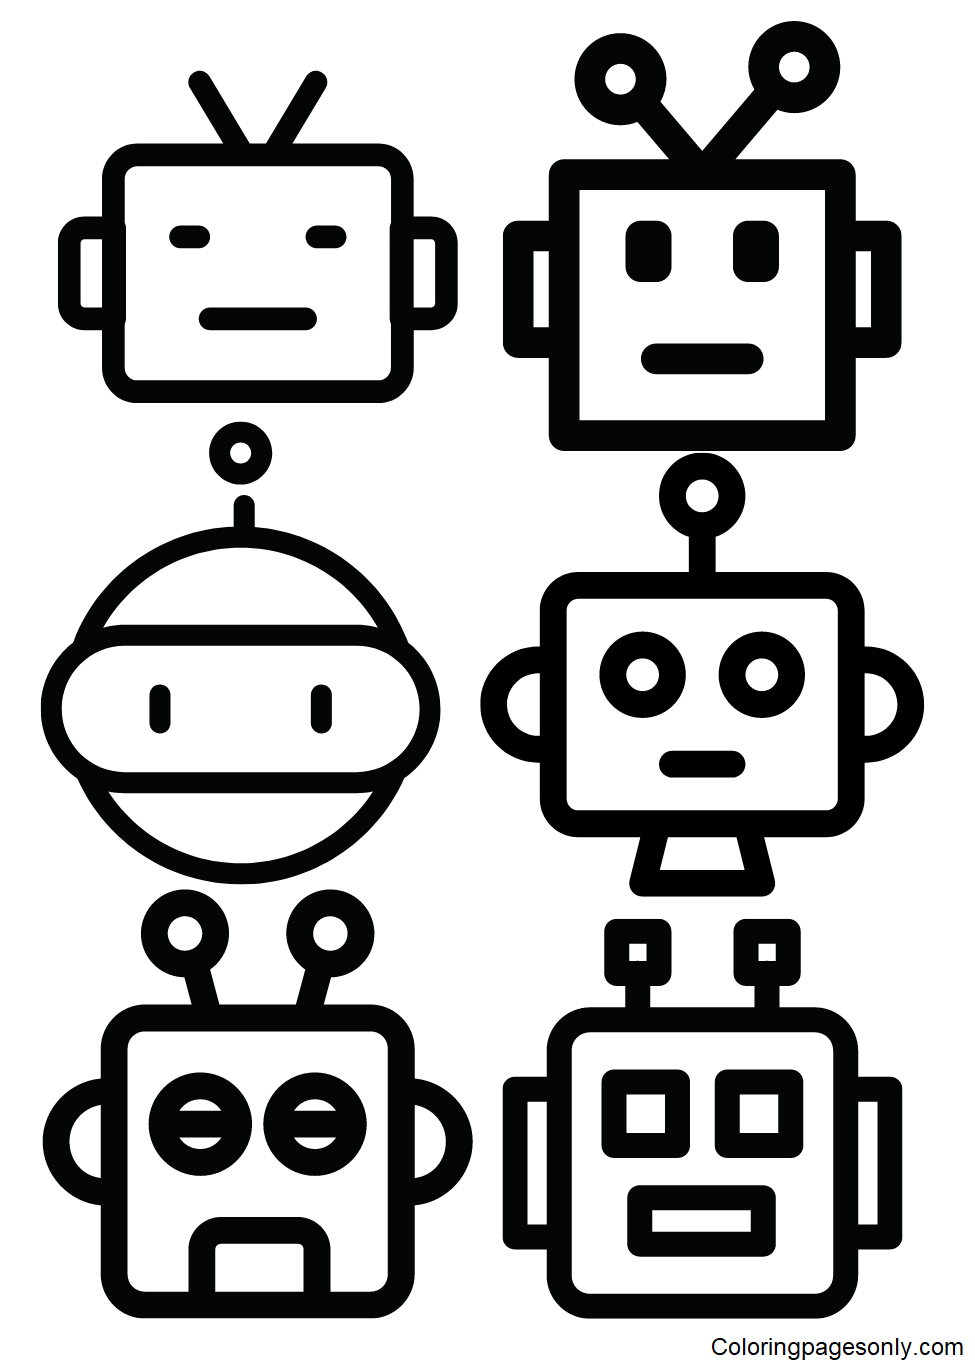 Emotion Bots Coloring Pages